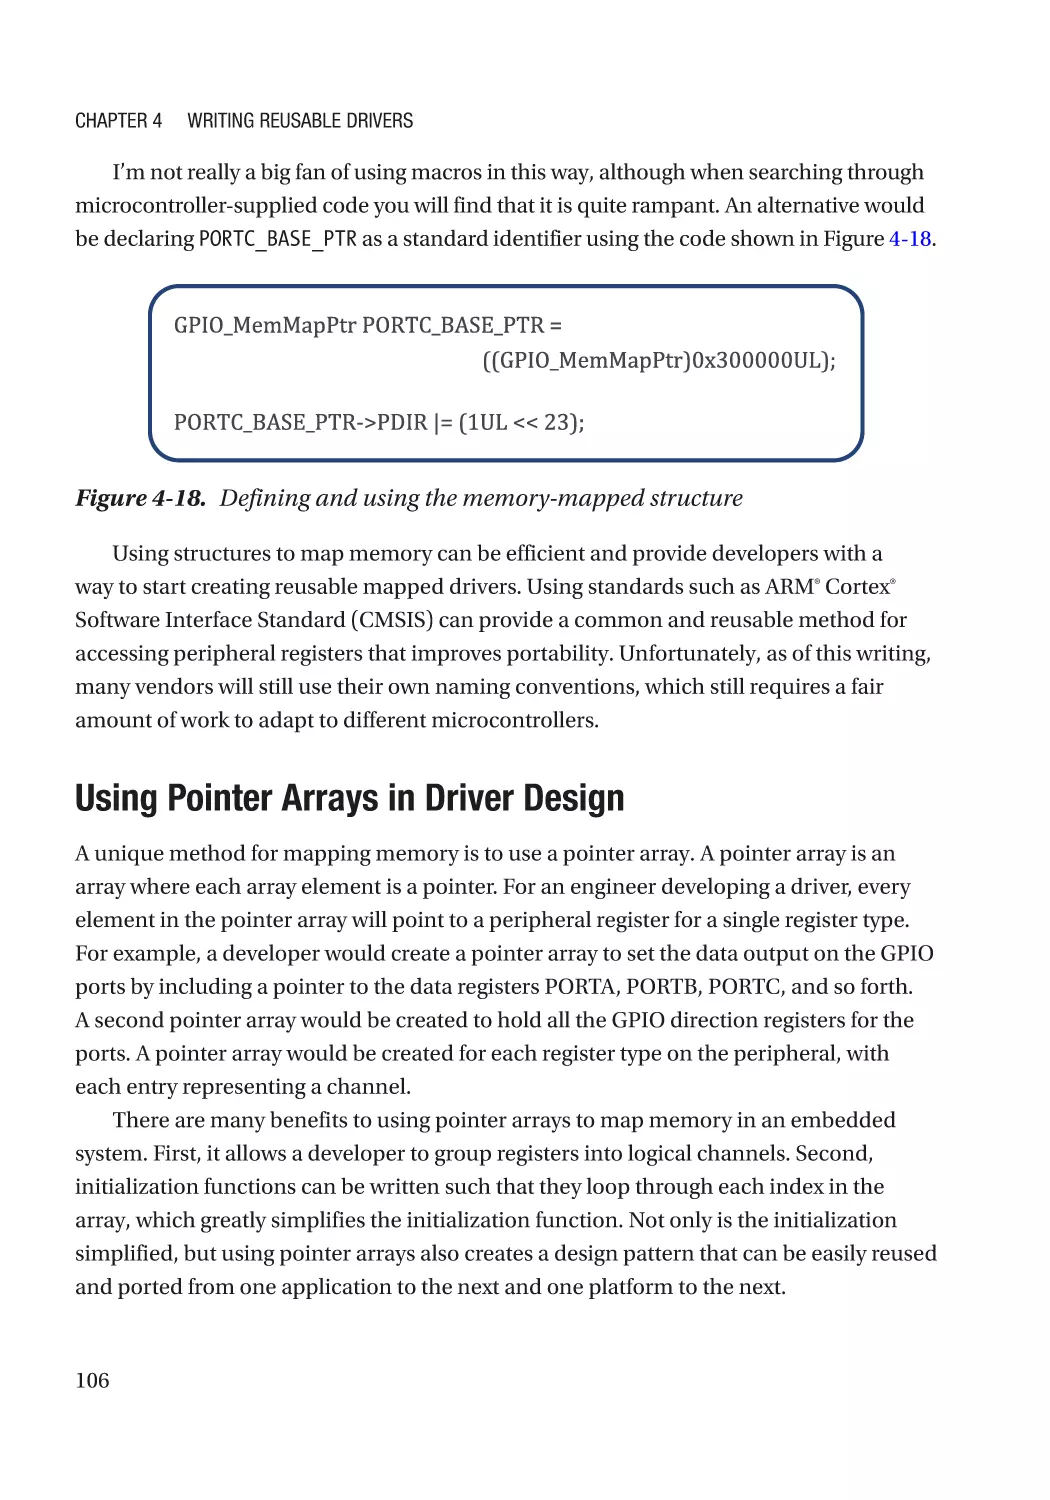 Using Pointer Arrays in Driver Design